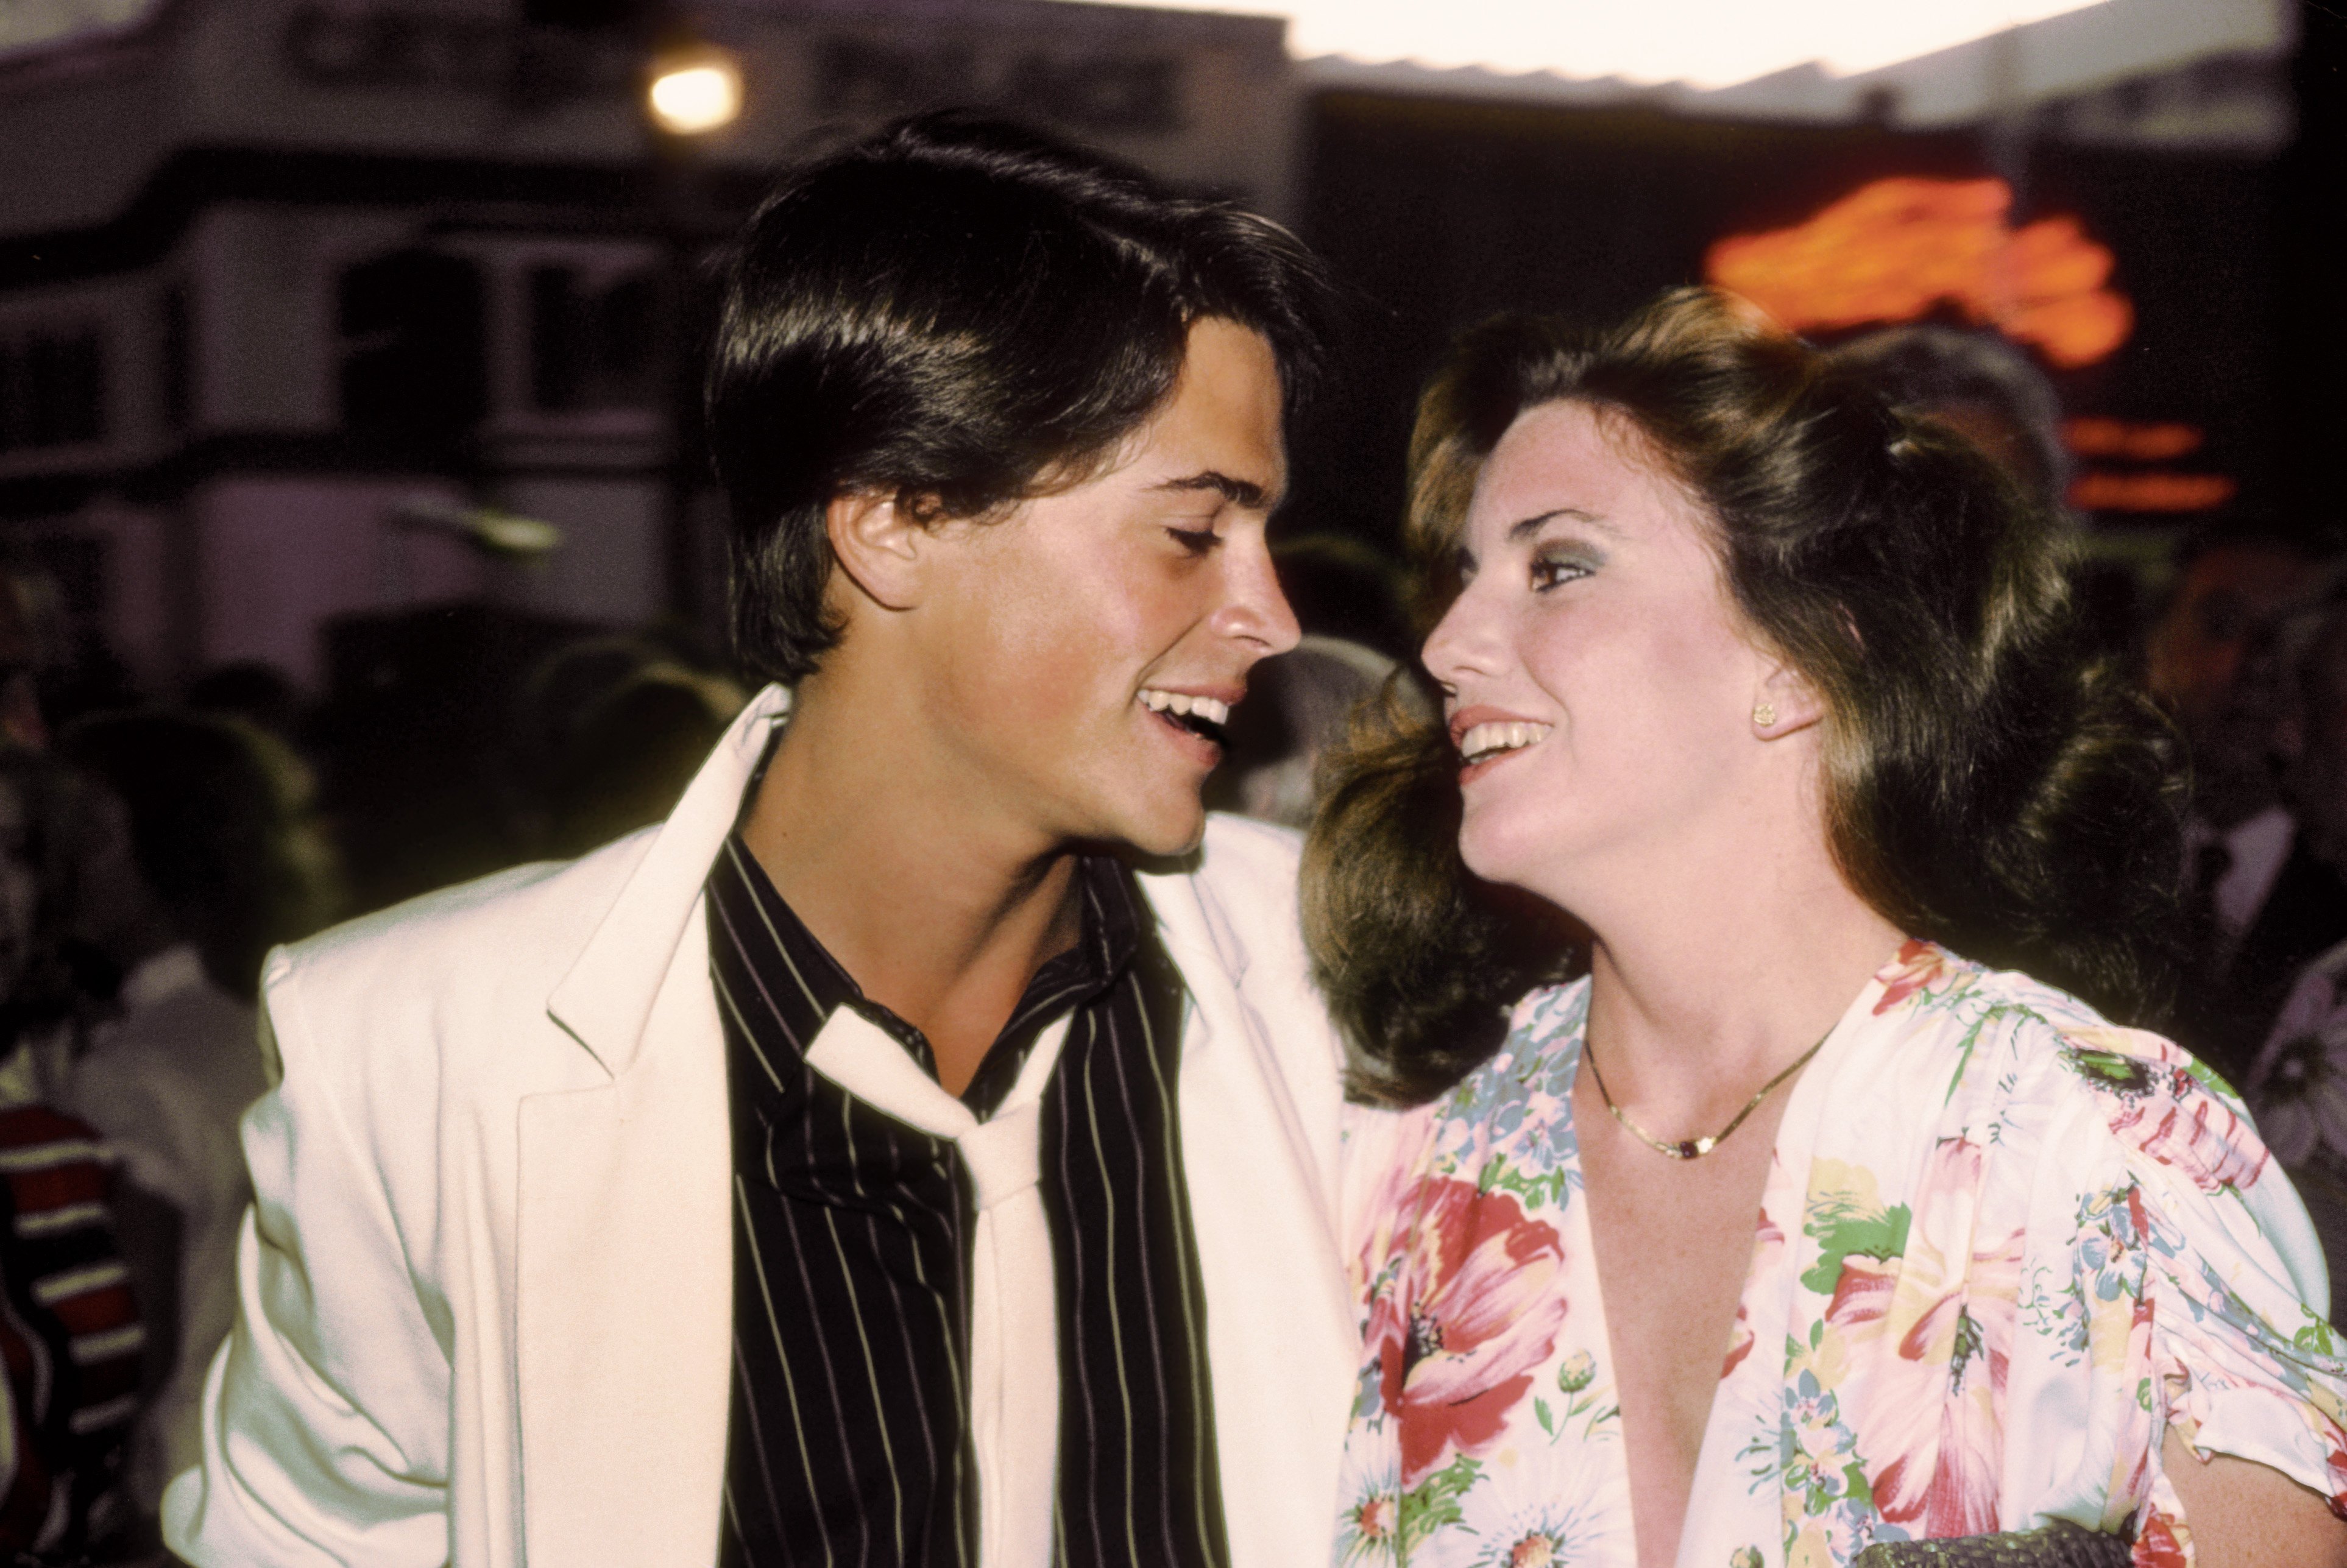 Rob Lowe and Melissa Gilbert |  Vinnie Zuffante/Michael Ochs Archives/Getty Images